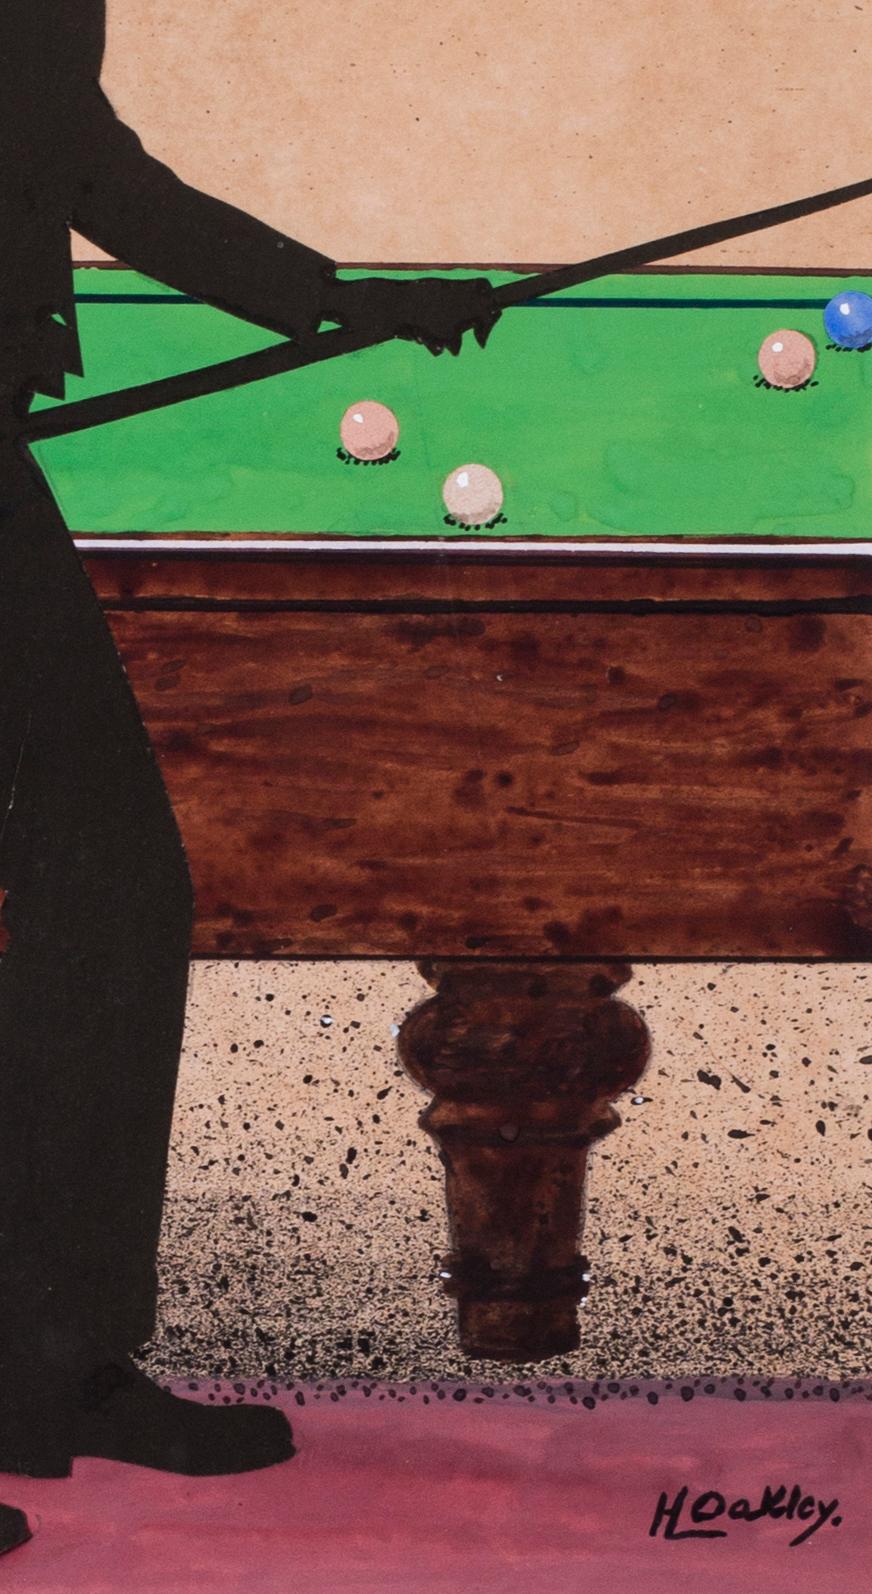 British 20th Century original watercolour painting of a snooker / pool player - Modern Painting by Unknown